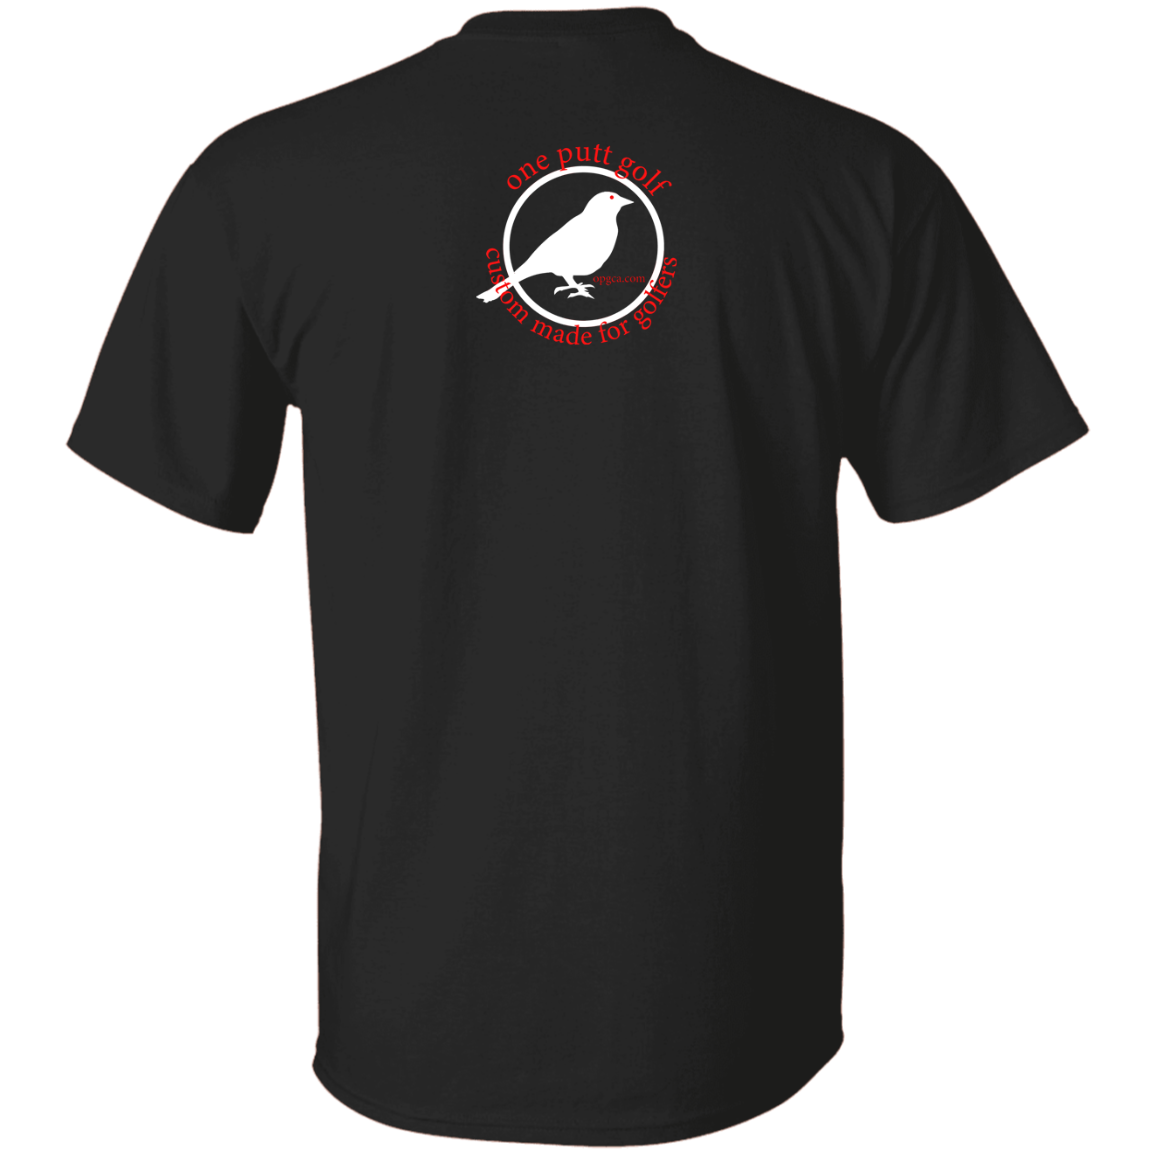 OPG Custom Design # 24. Ornithologist. A person who studies or is an expert on birds. 5.3 oz. T-Shirt